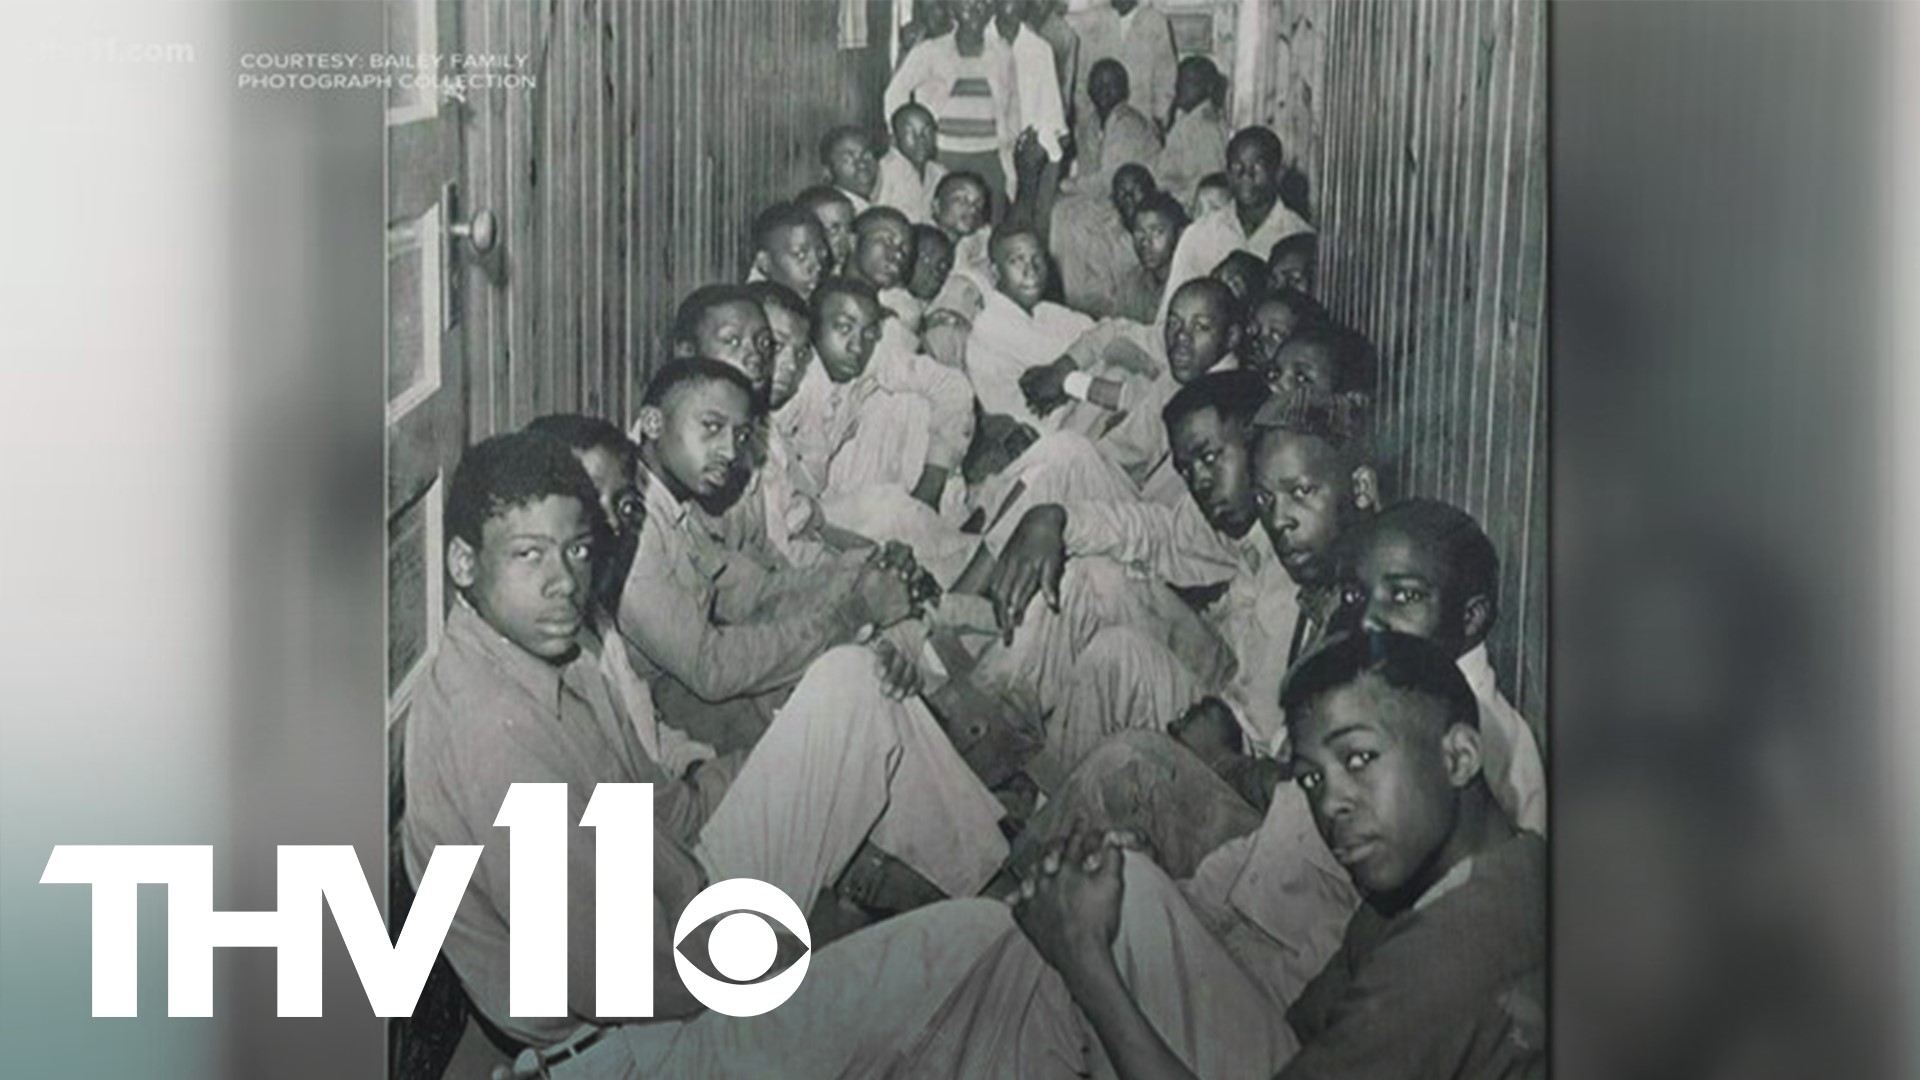 It was March 5, 1959 at 4 a.m. when 21 African American boys, ages 13 to 17, died in a fire while locked inside the dormitories of a school in Wrightsville.